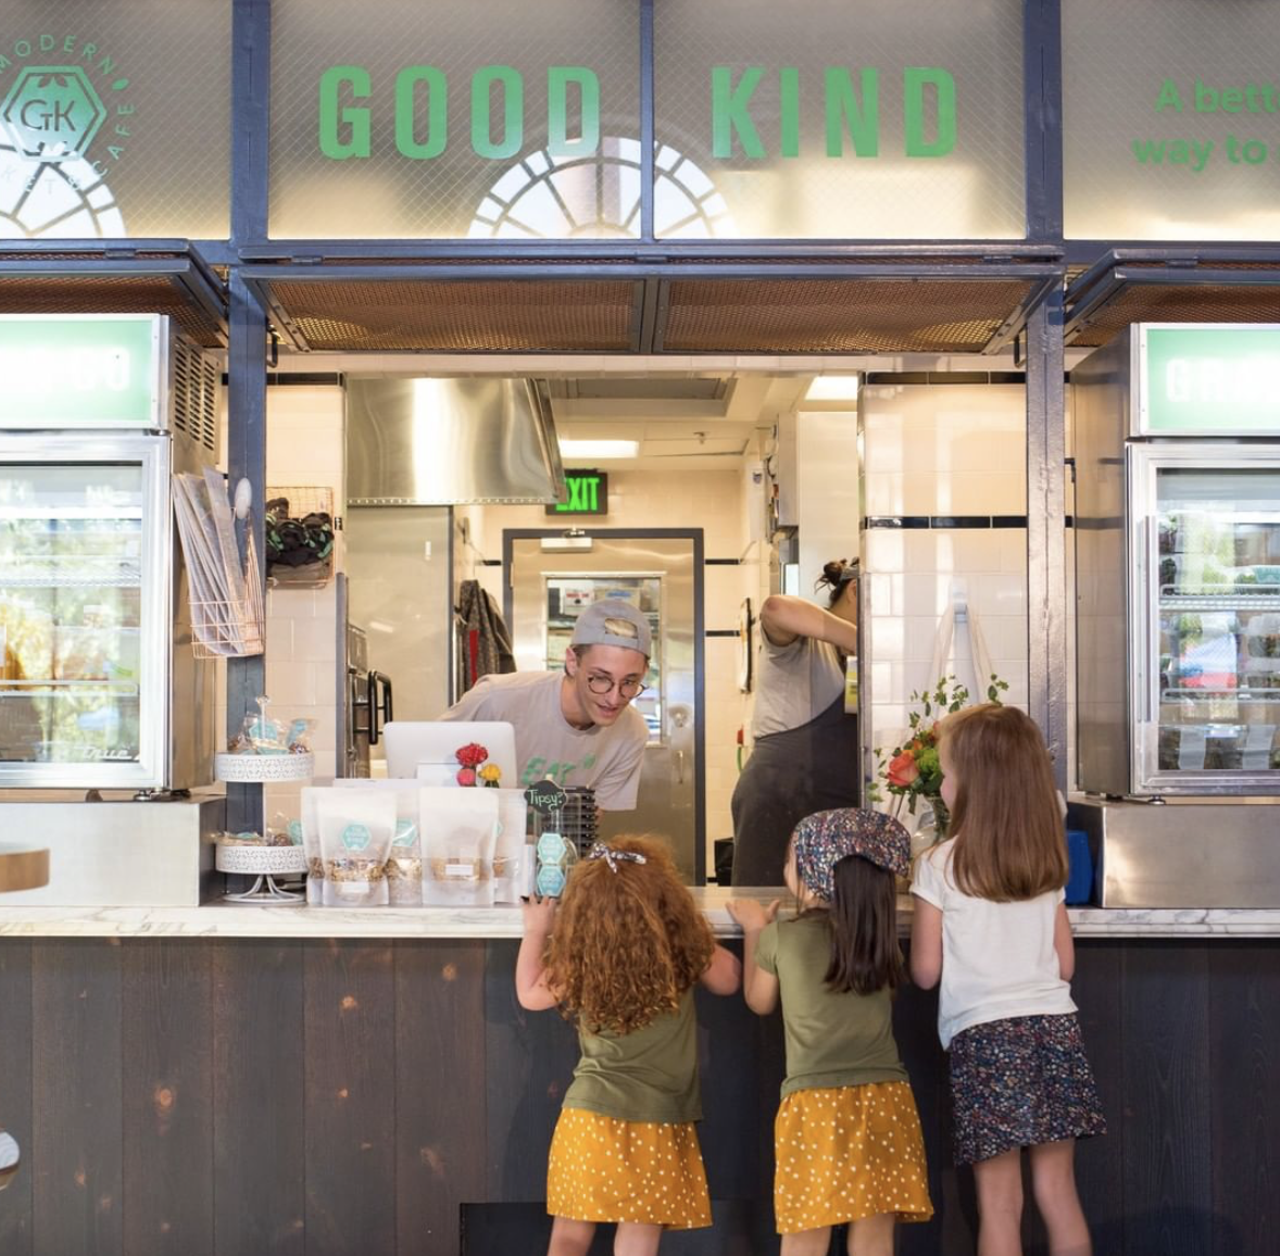 The Good Kind at the Pearl
312 Pearl Parkway
Health-conscious joint The Good Kind shuttered its Pearl location to focus on other concepts by owner Tim McDiarmid: The Good Kind Southtown, Ivy Hall Events and Tim the Girl Catering. The Southtown iteration of the restaurant still serves up its fresh eats and boozy drinks, plus wide open spaces for socially-distanced events and live music.  
Photo via Instagram / goodkindpearl